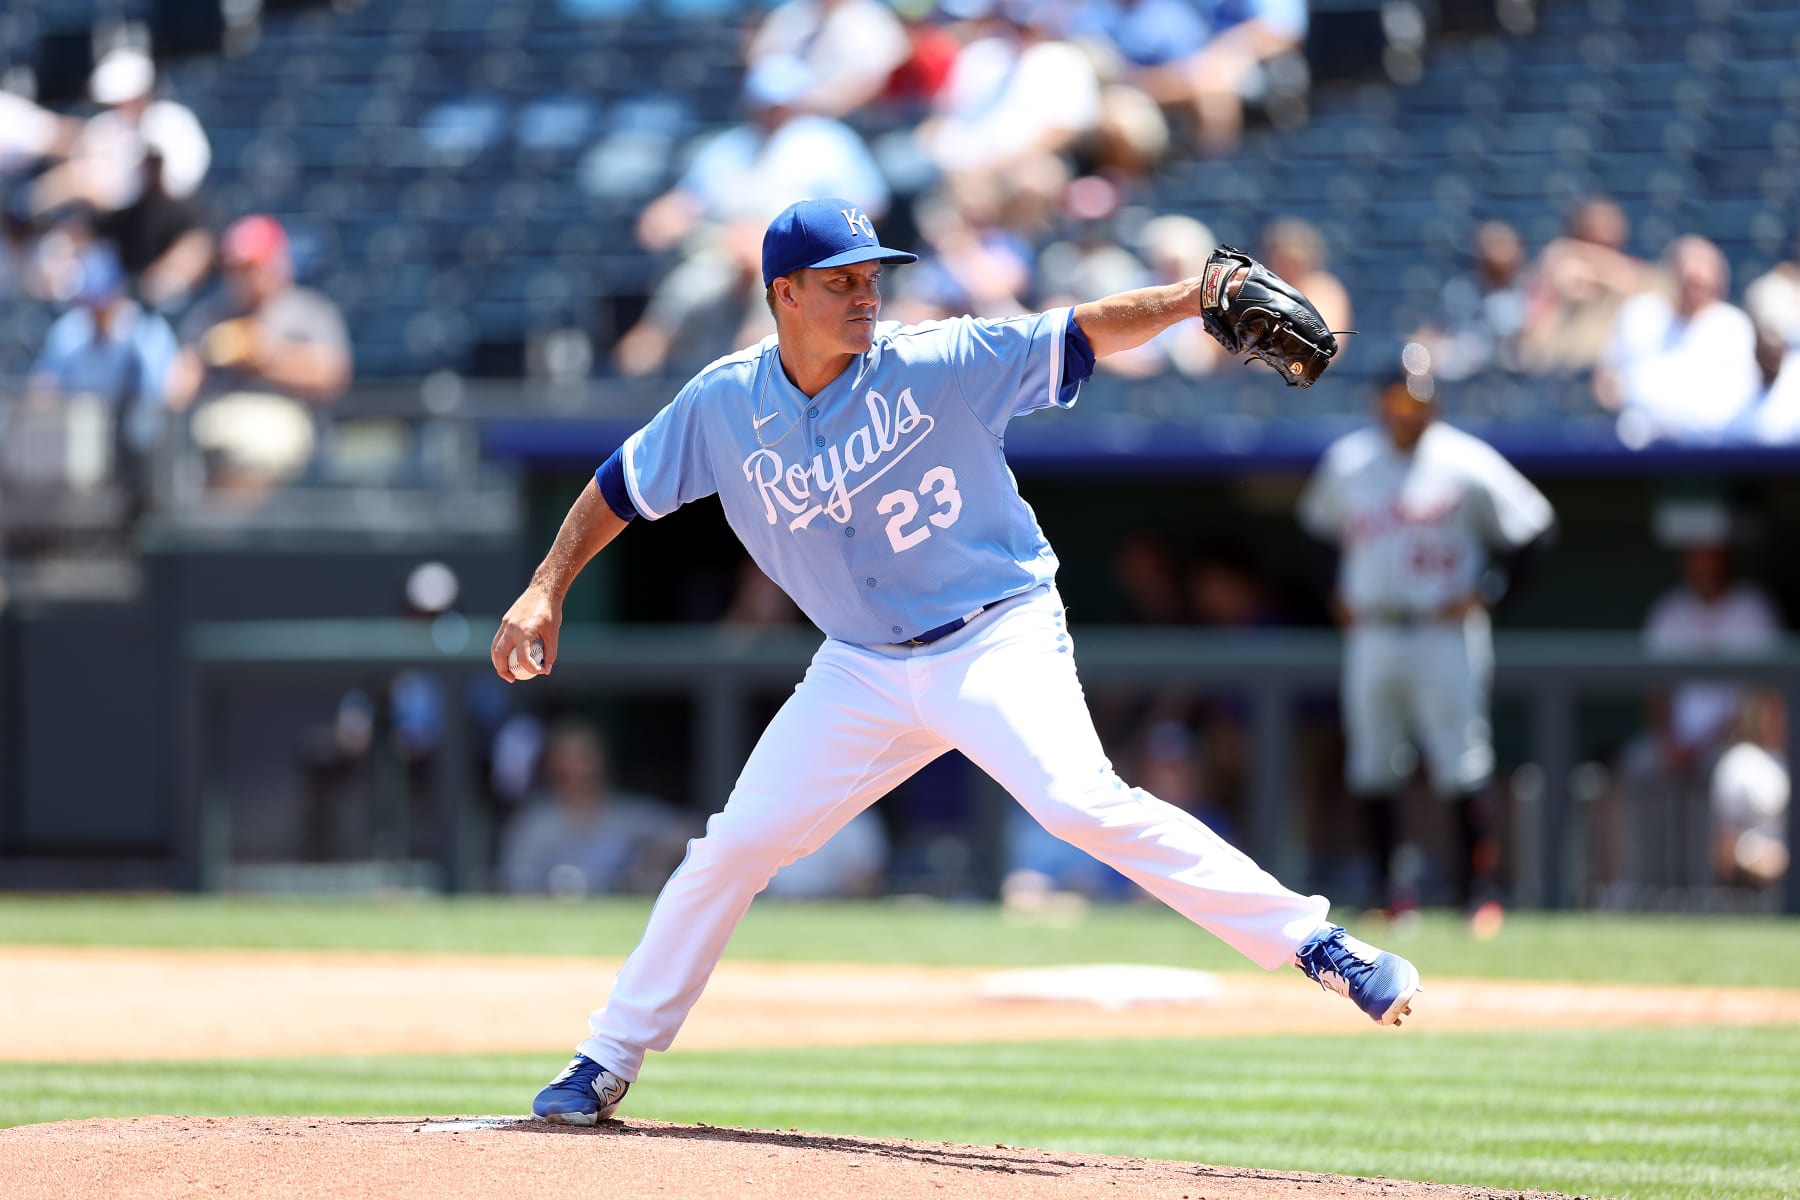 Zack Greinke Rumors: Royals Not Expected to Trade Star SP Ahead of